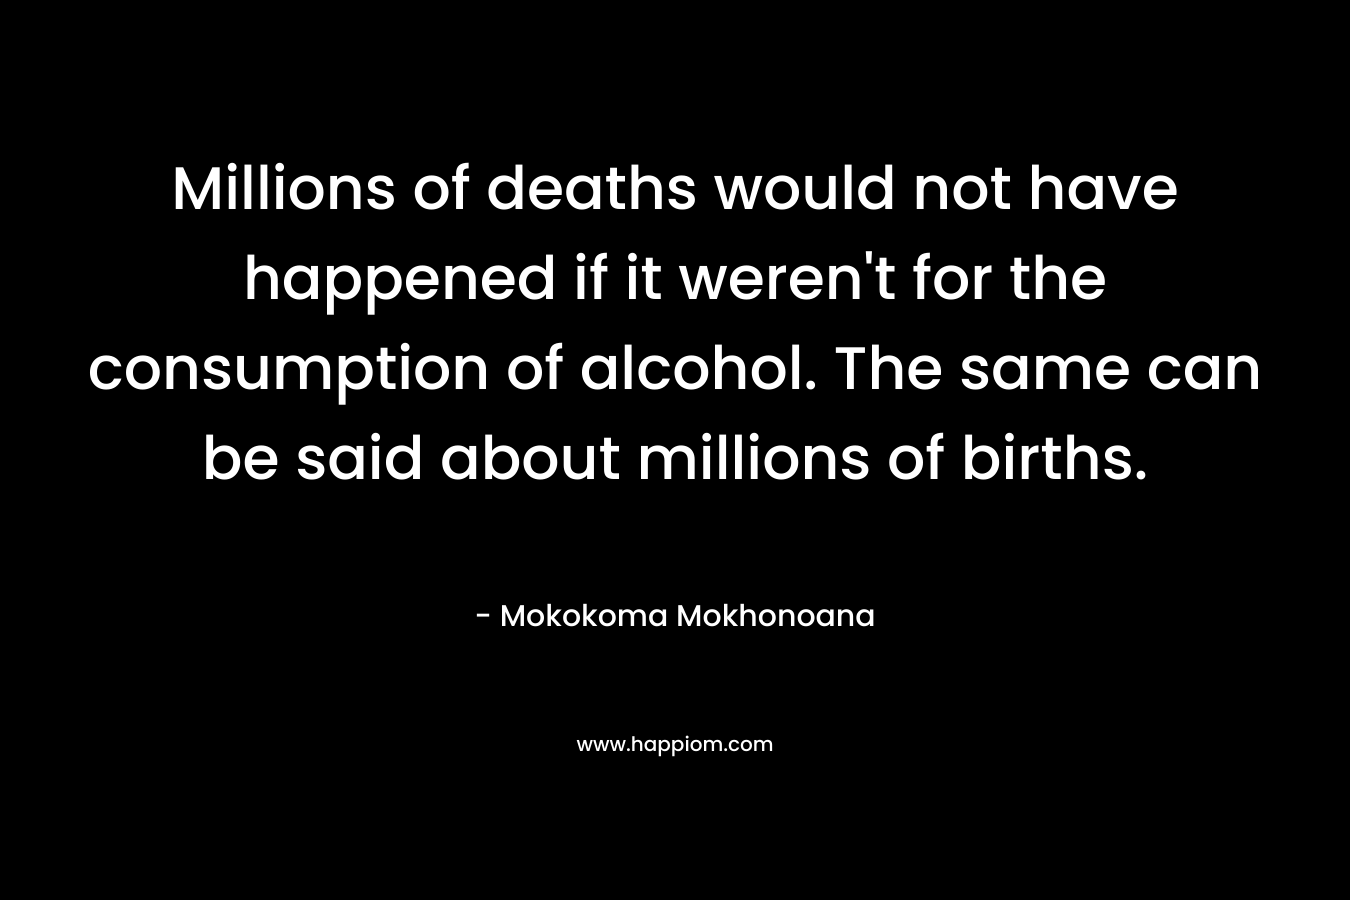 Millions of deaths would not have happened if it weren't for the consumption of alcohol. The same can be said about millions of births.